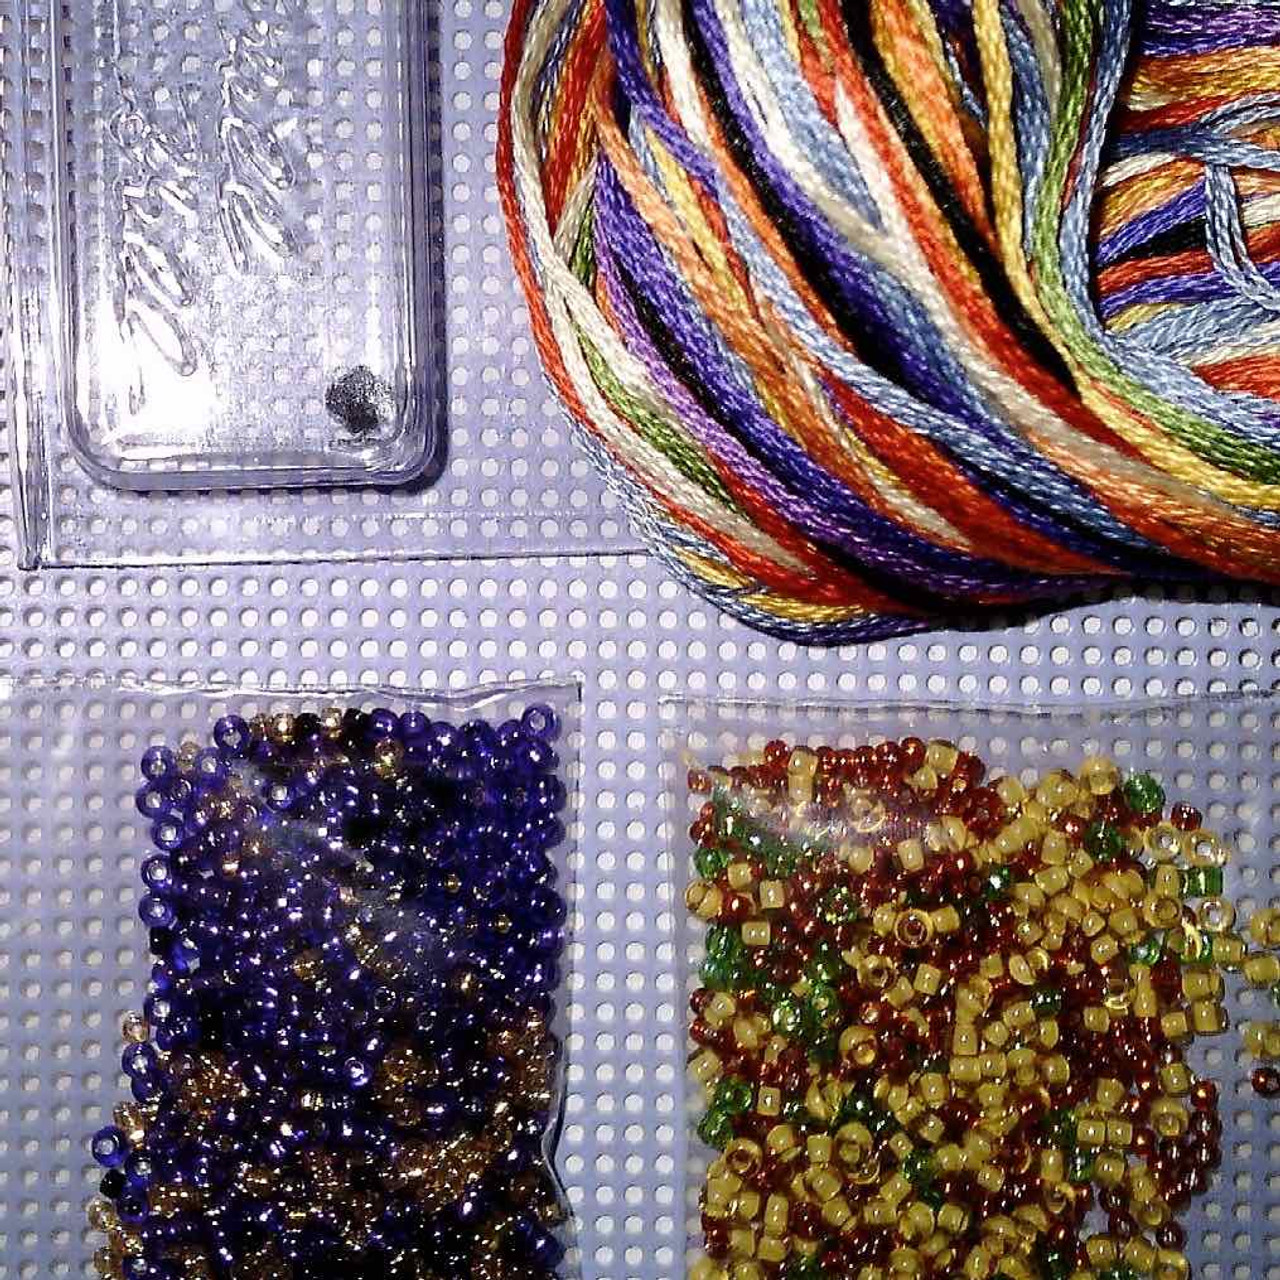 Materials included in Sally Scarecrow Bead Cross Stitch Kit Mill Hill 2017 Autumn Harvest MH181723